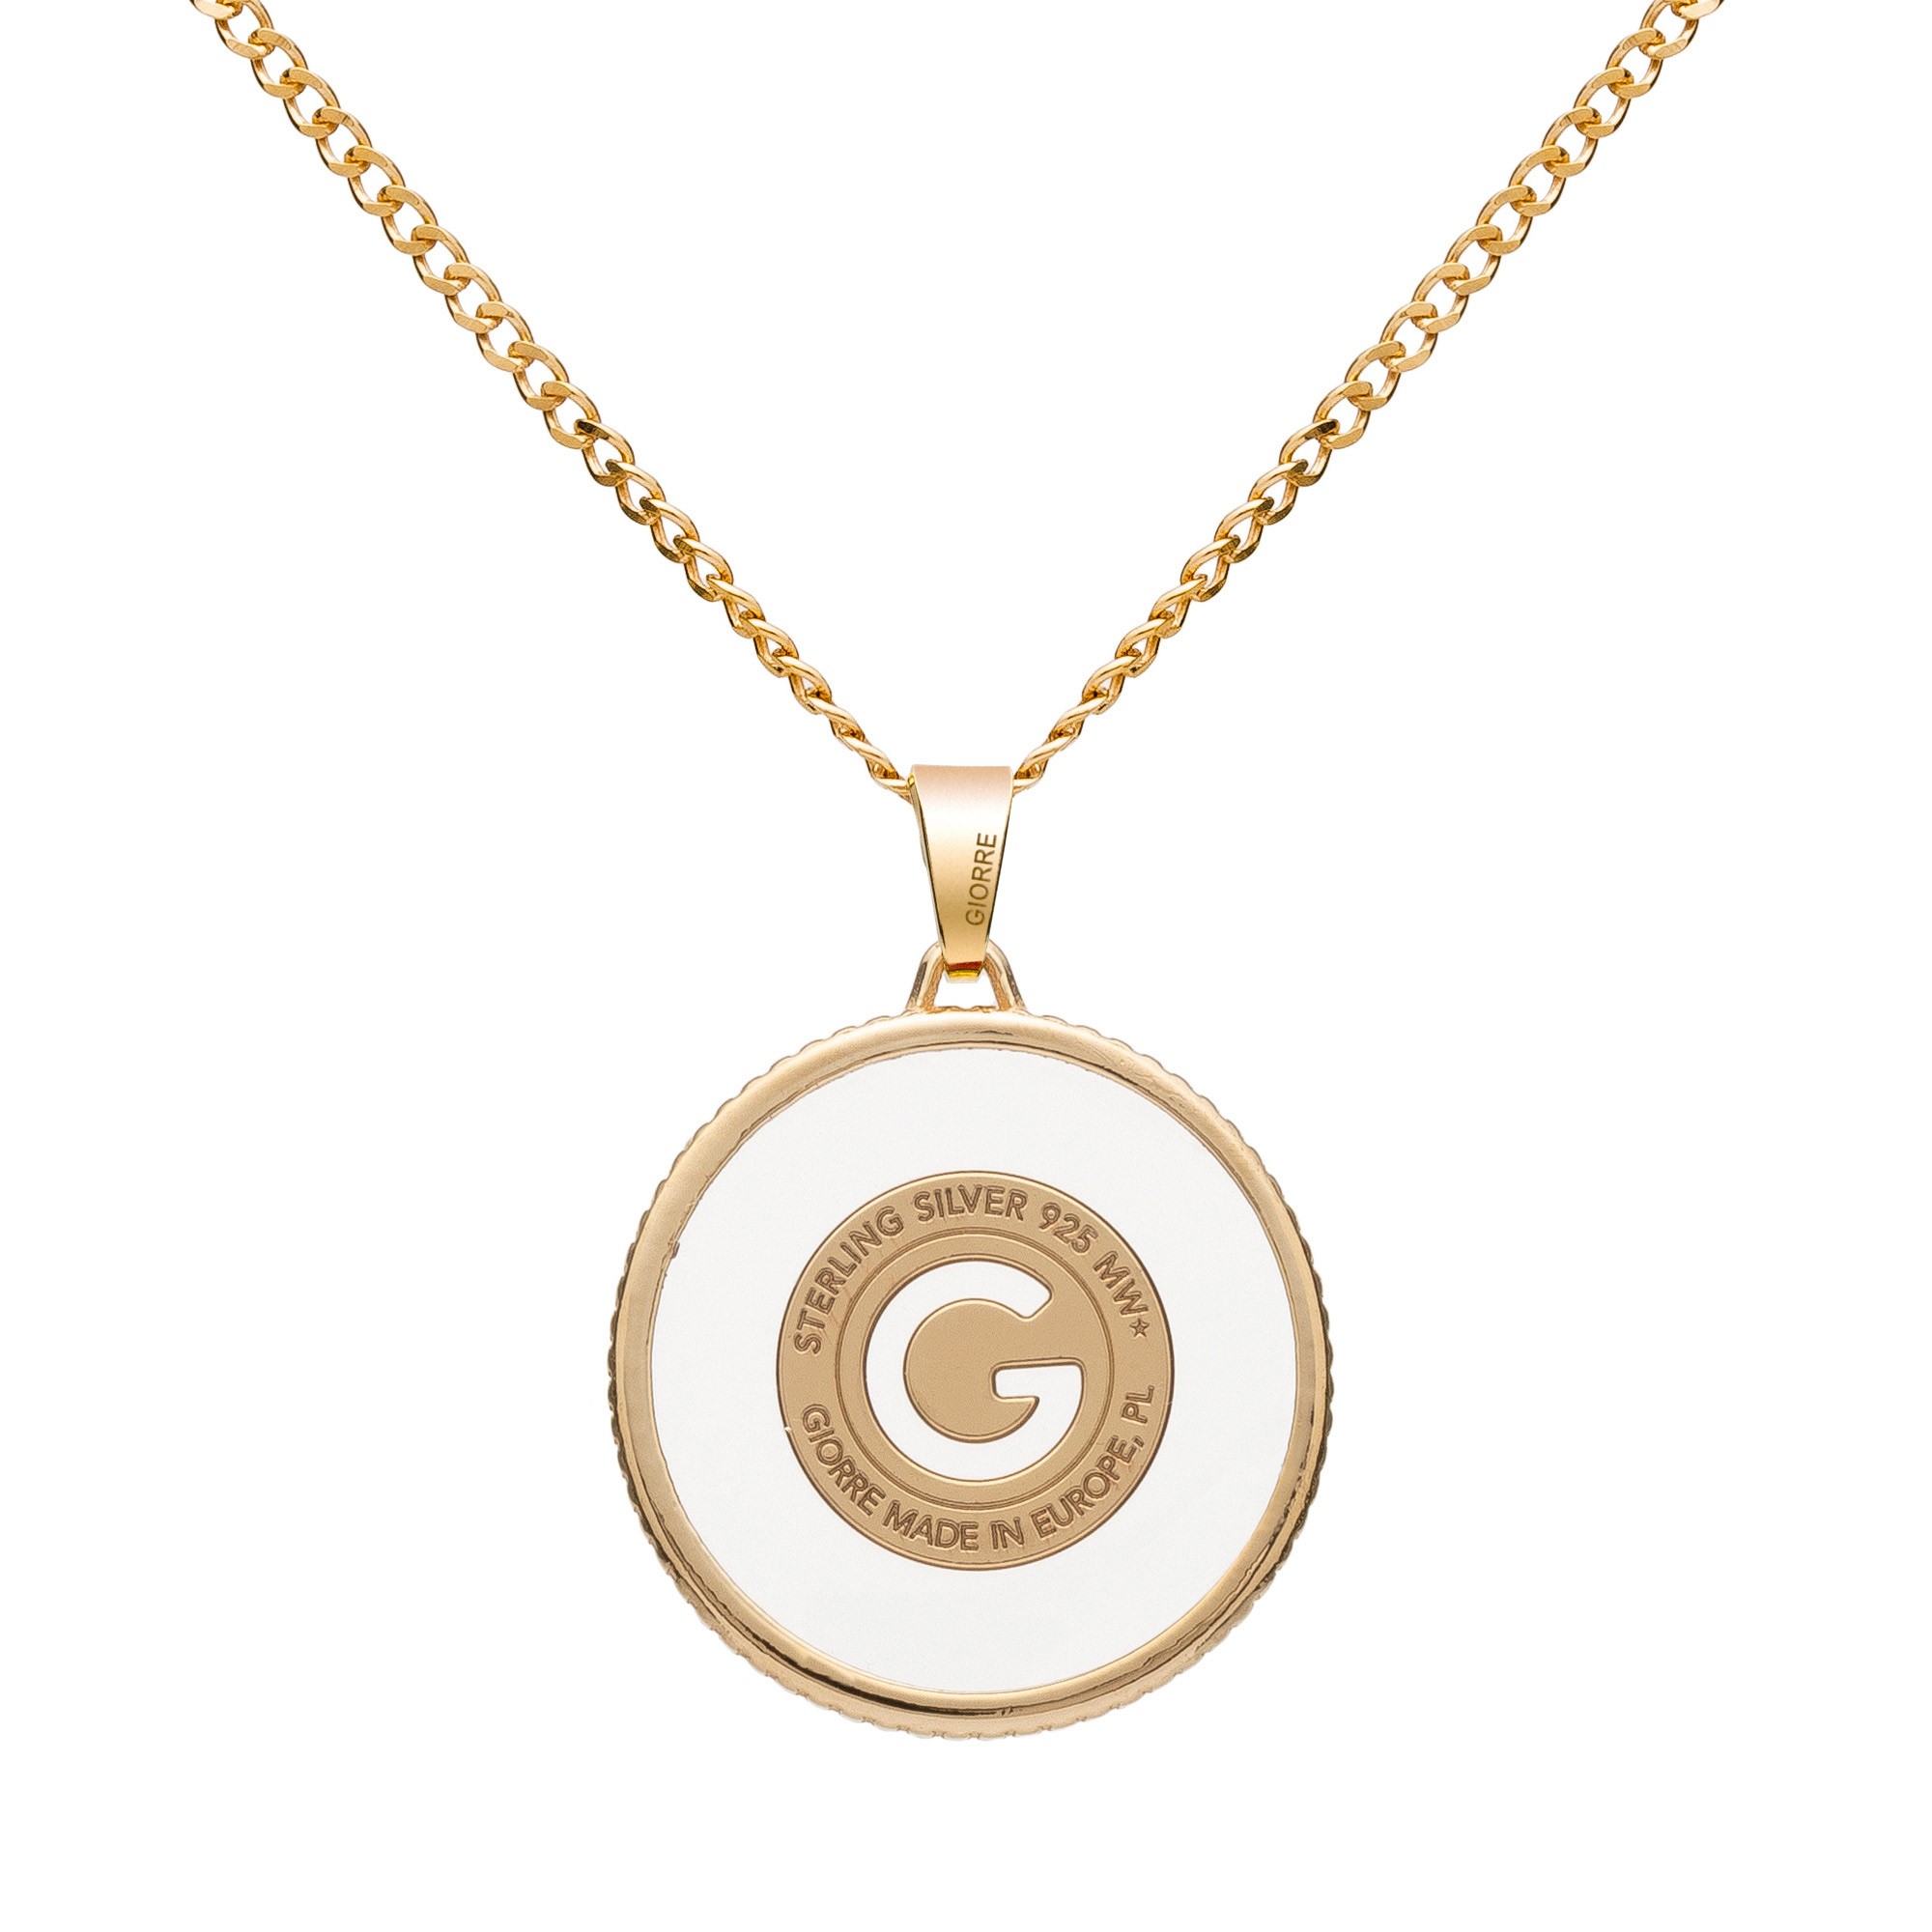 Silver medallion with GIORRE logo, resin, 925 silver